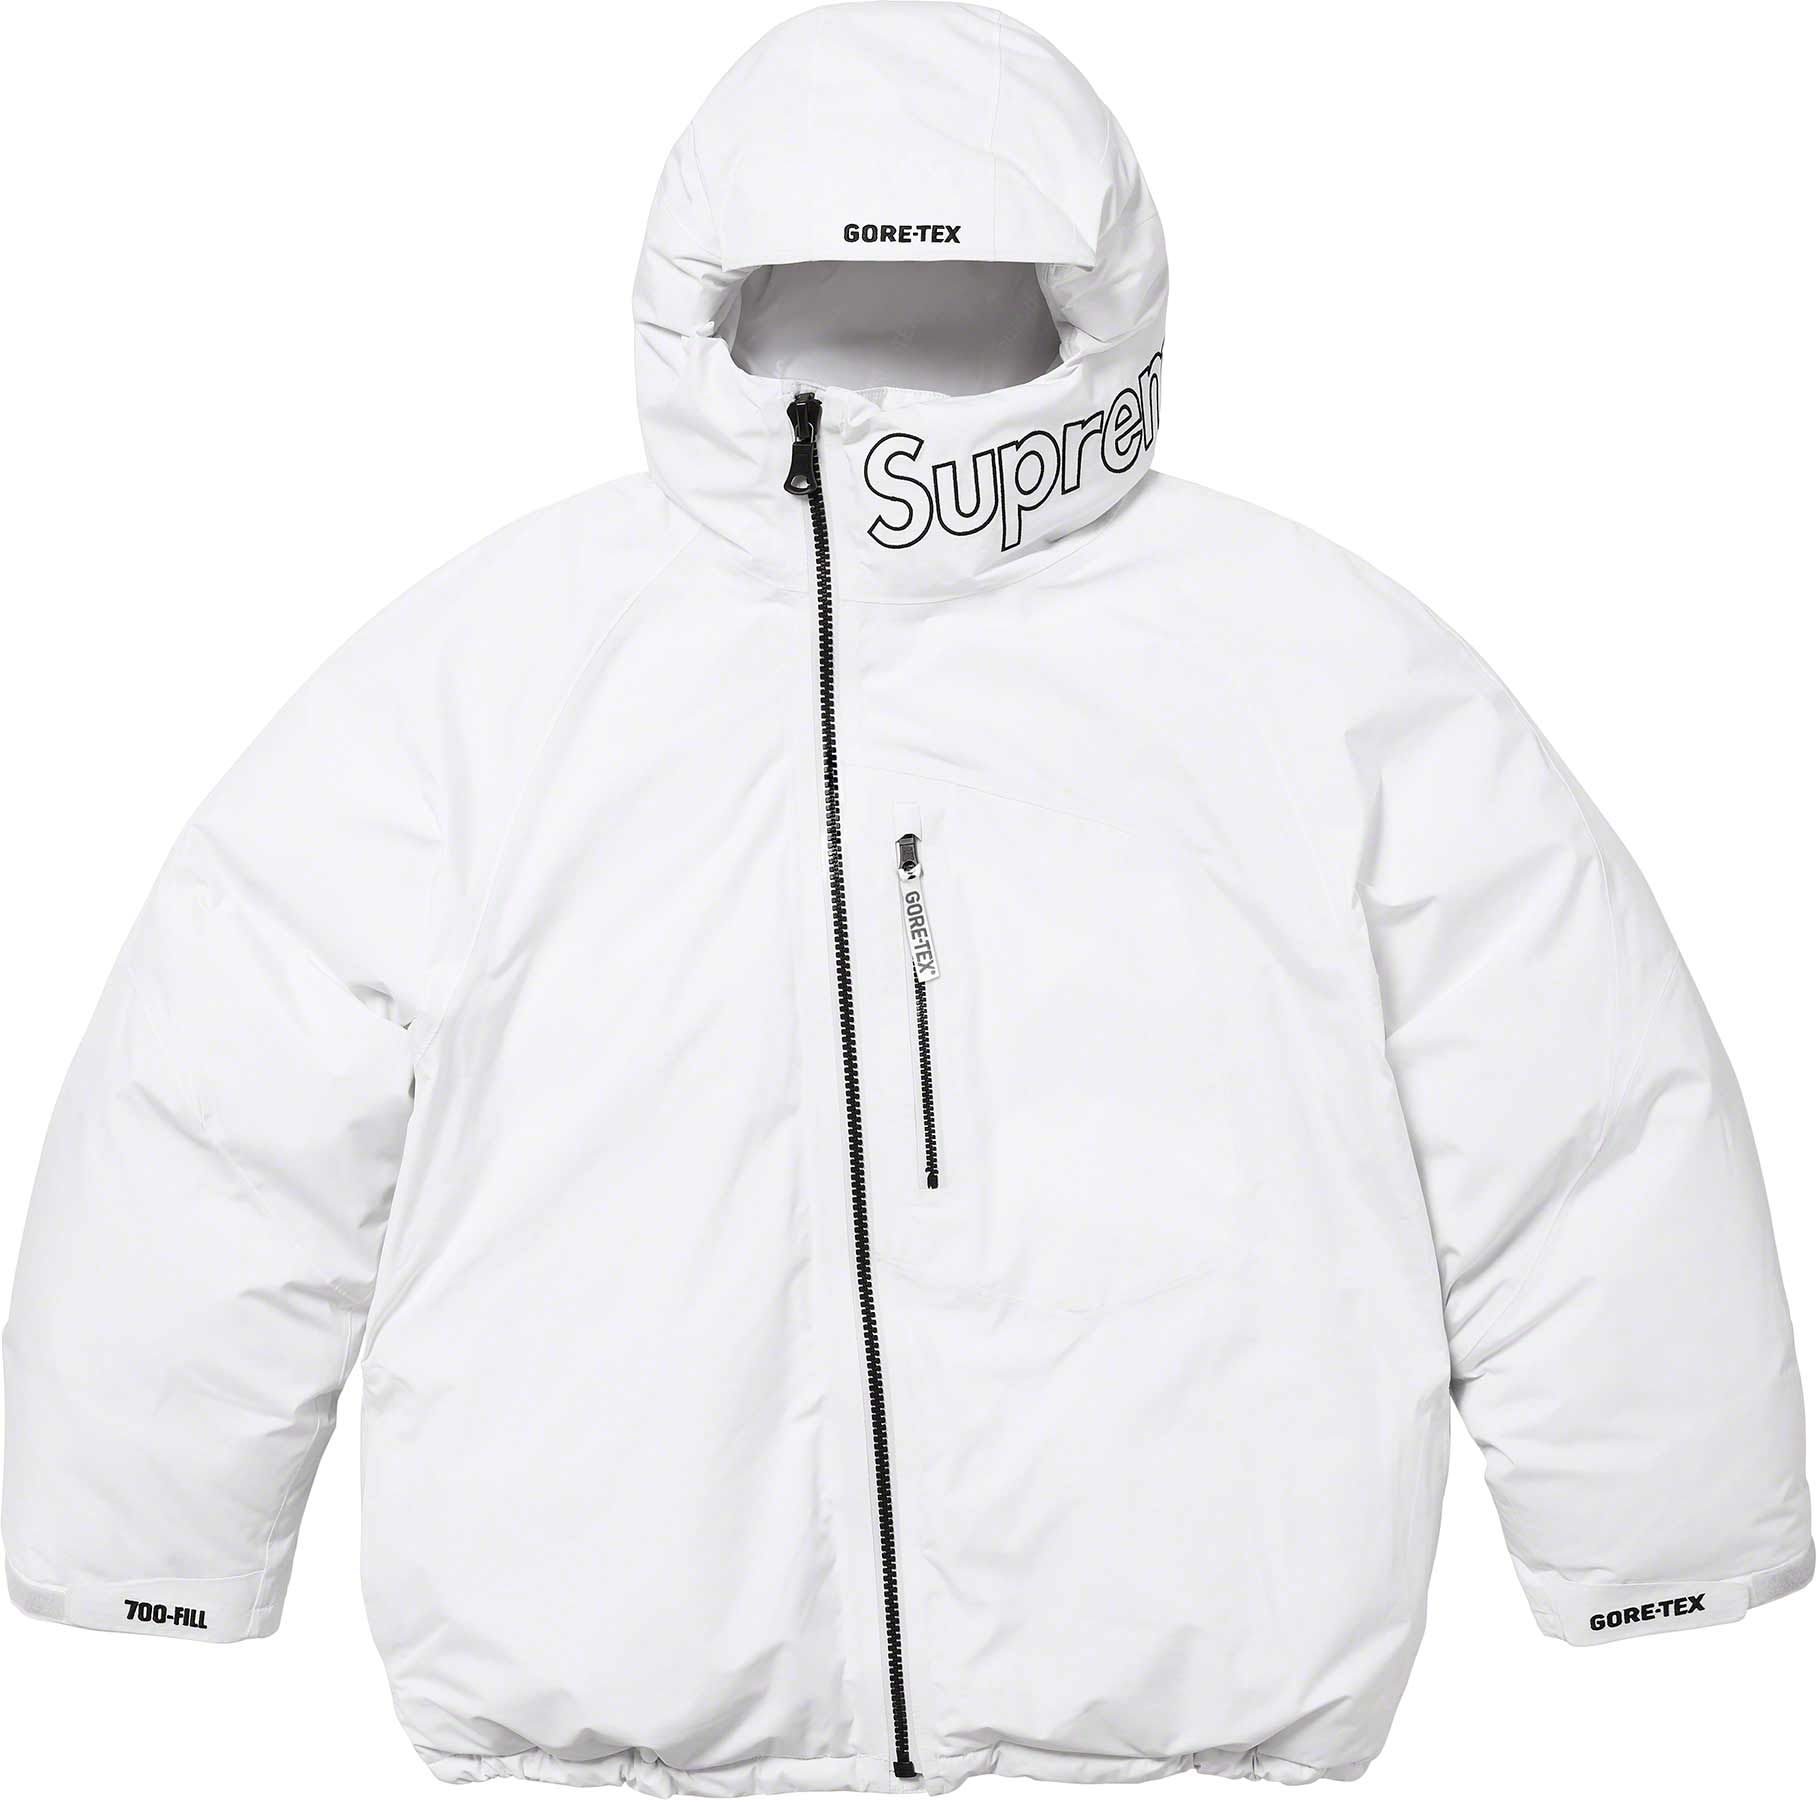 Wildcat Sideline Puffer Jacket - Fall/Winter 2023 Preview – Supreme